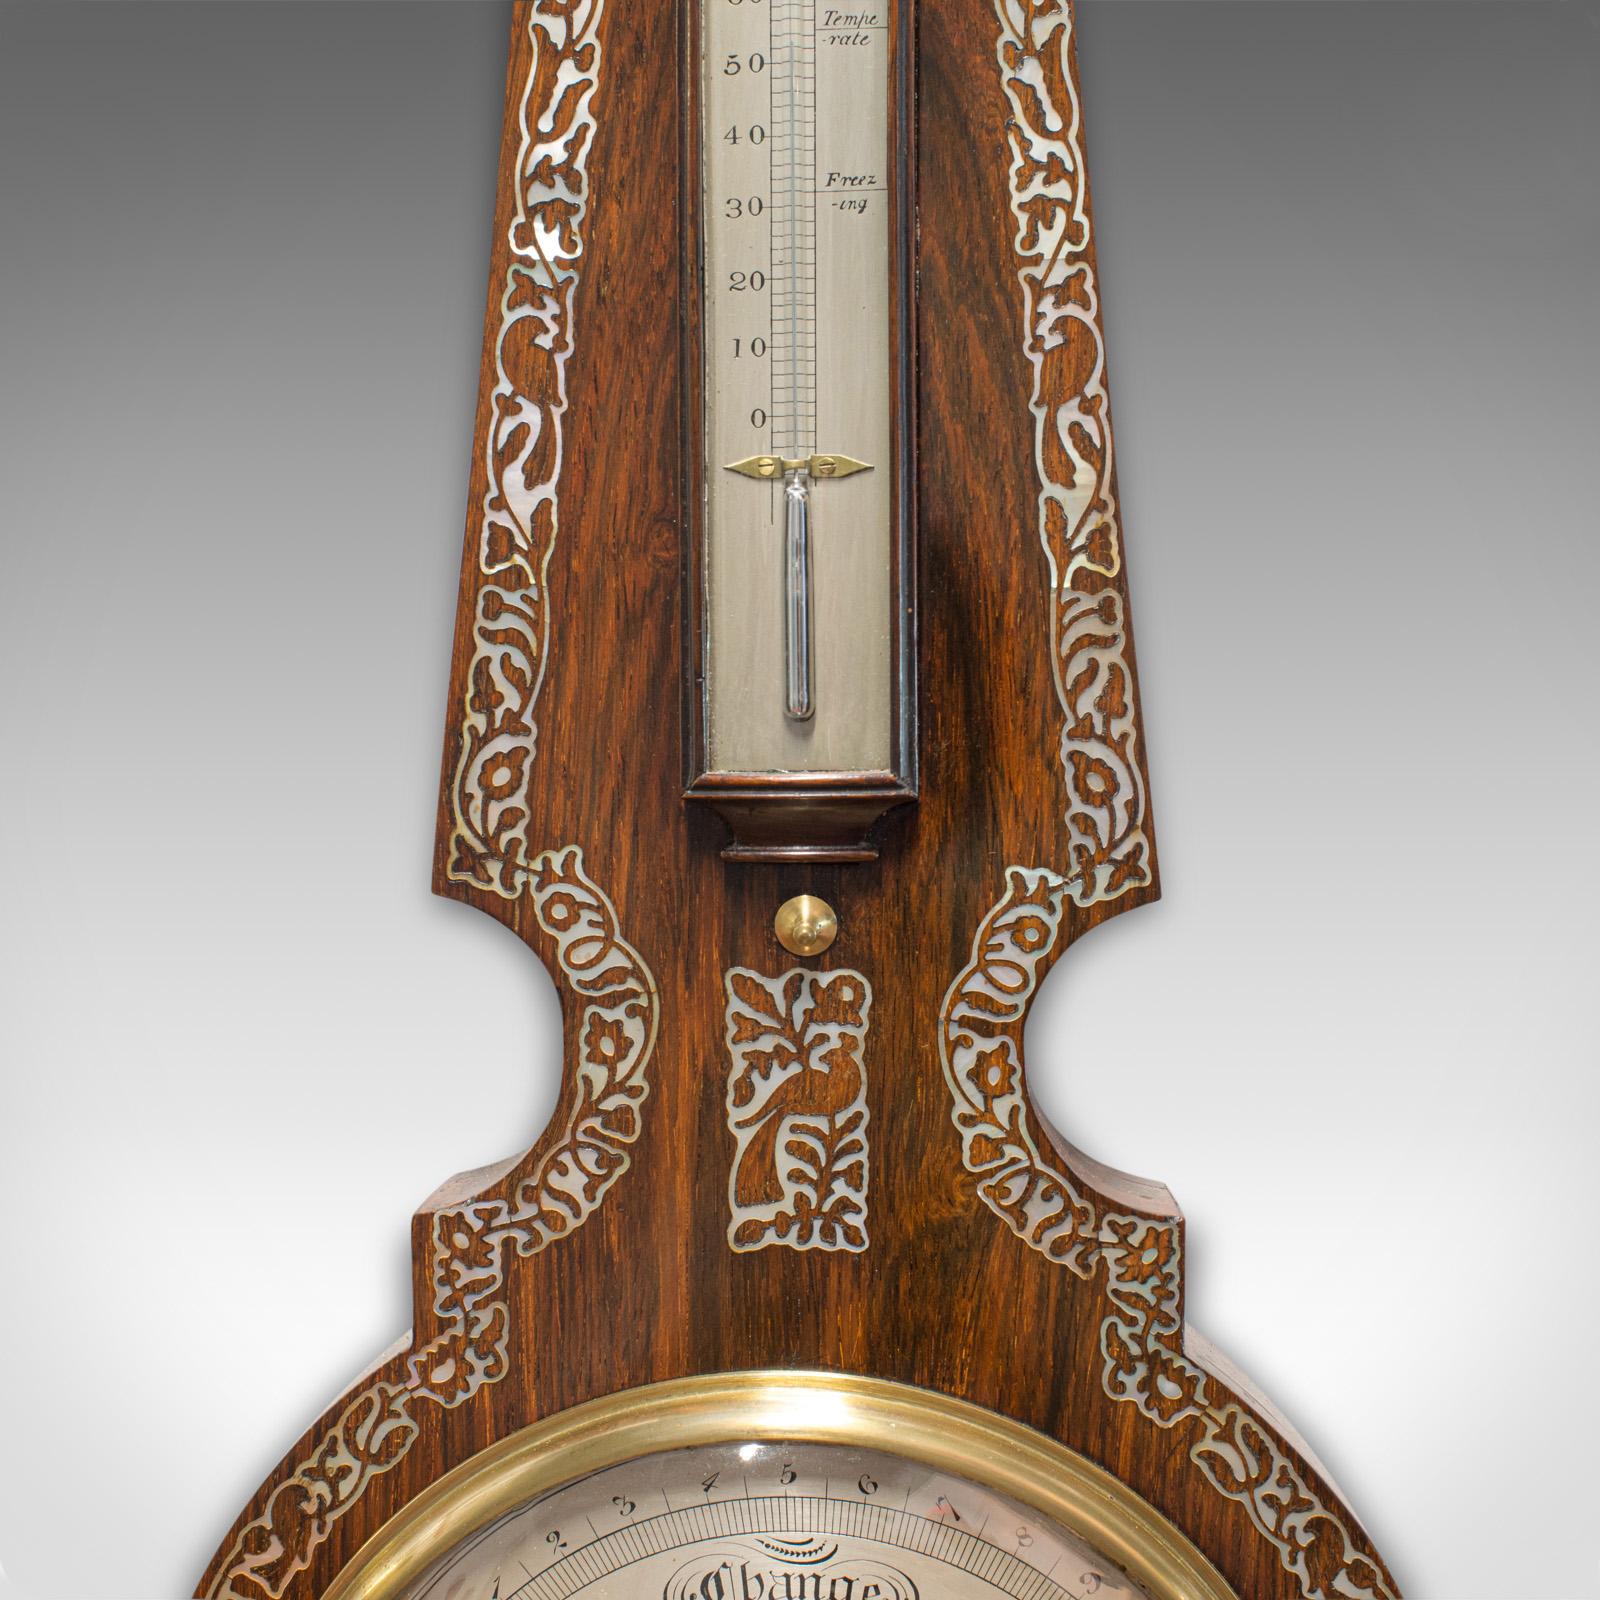 19th Century Antique Banjo Barometer, English, Rosewood, Mother of Pearl, Victorian